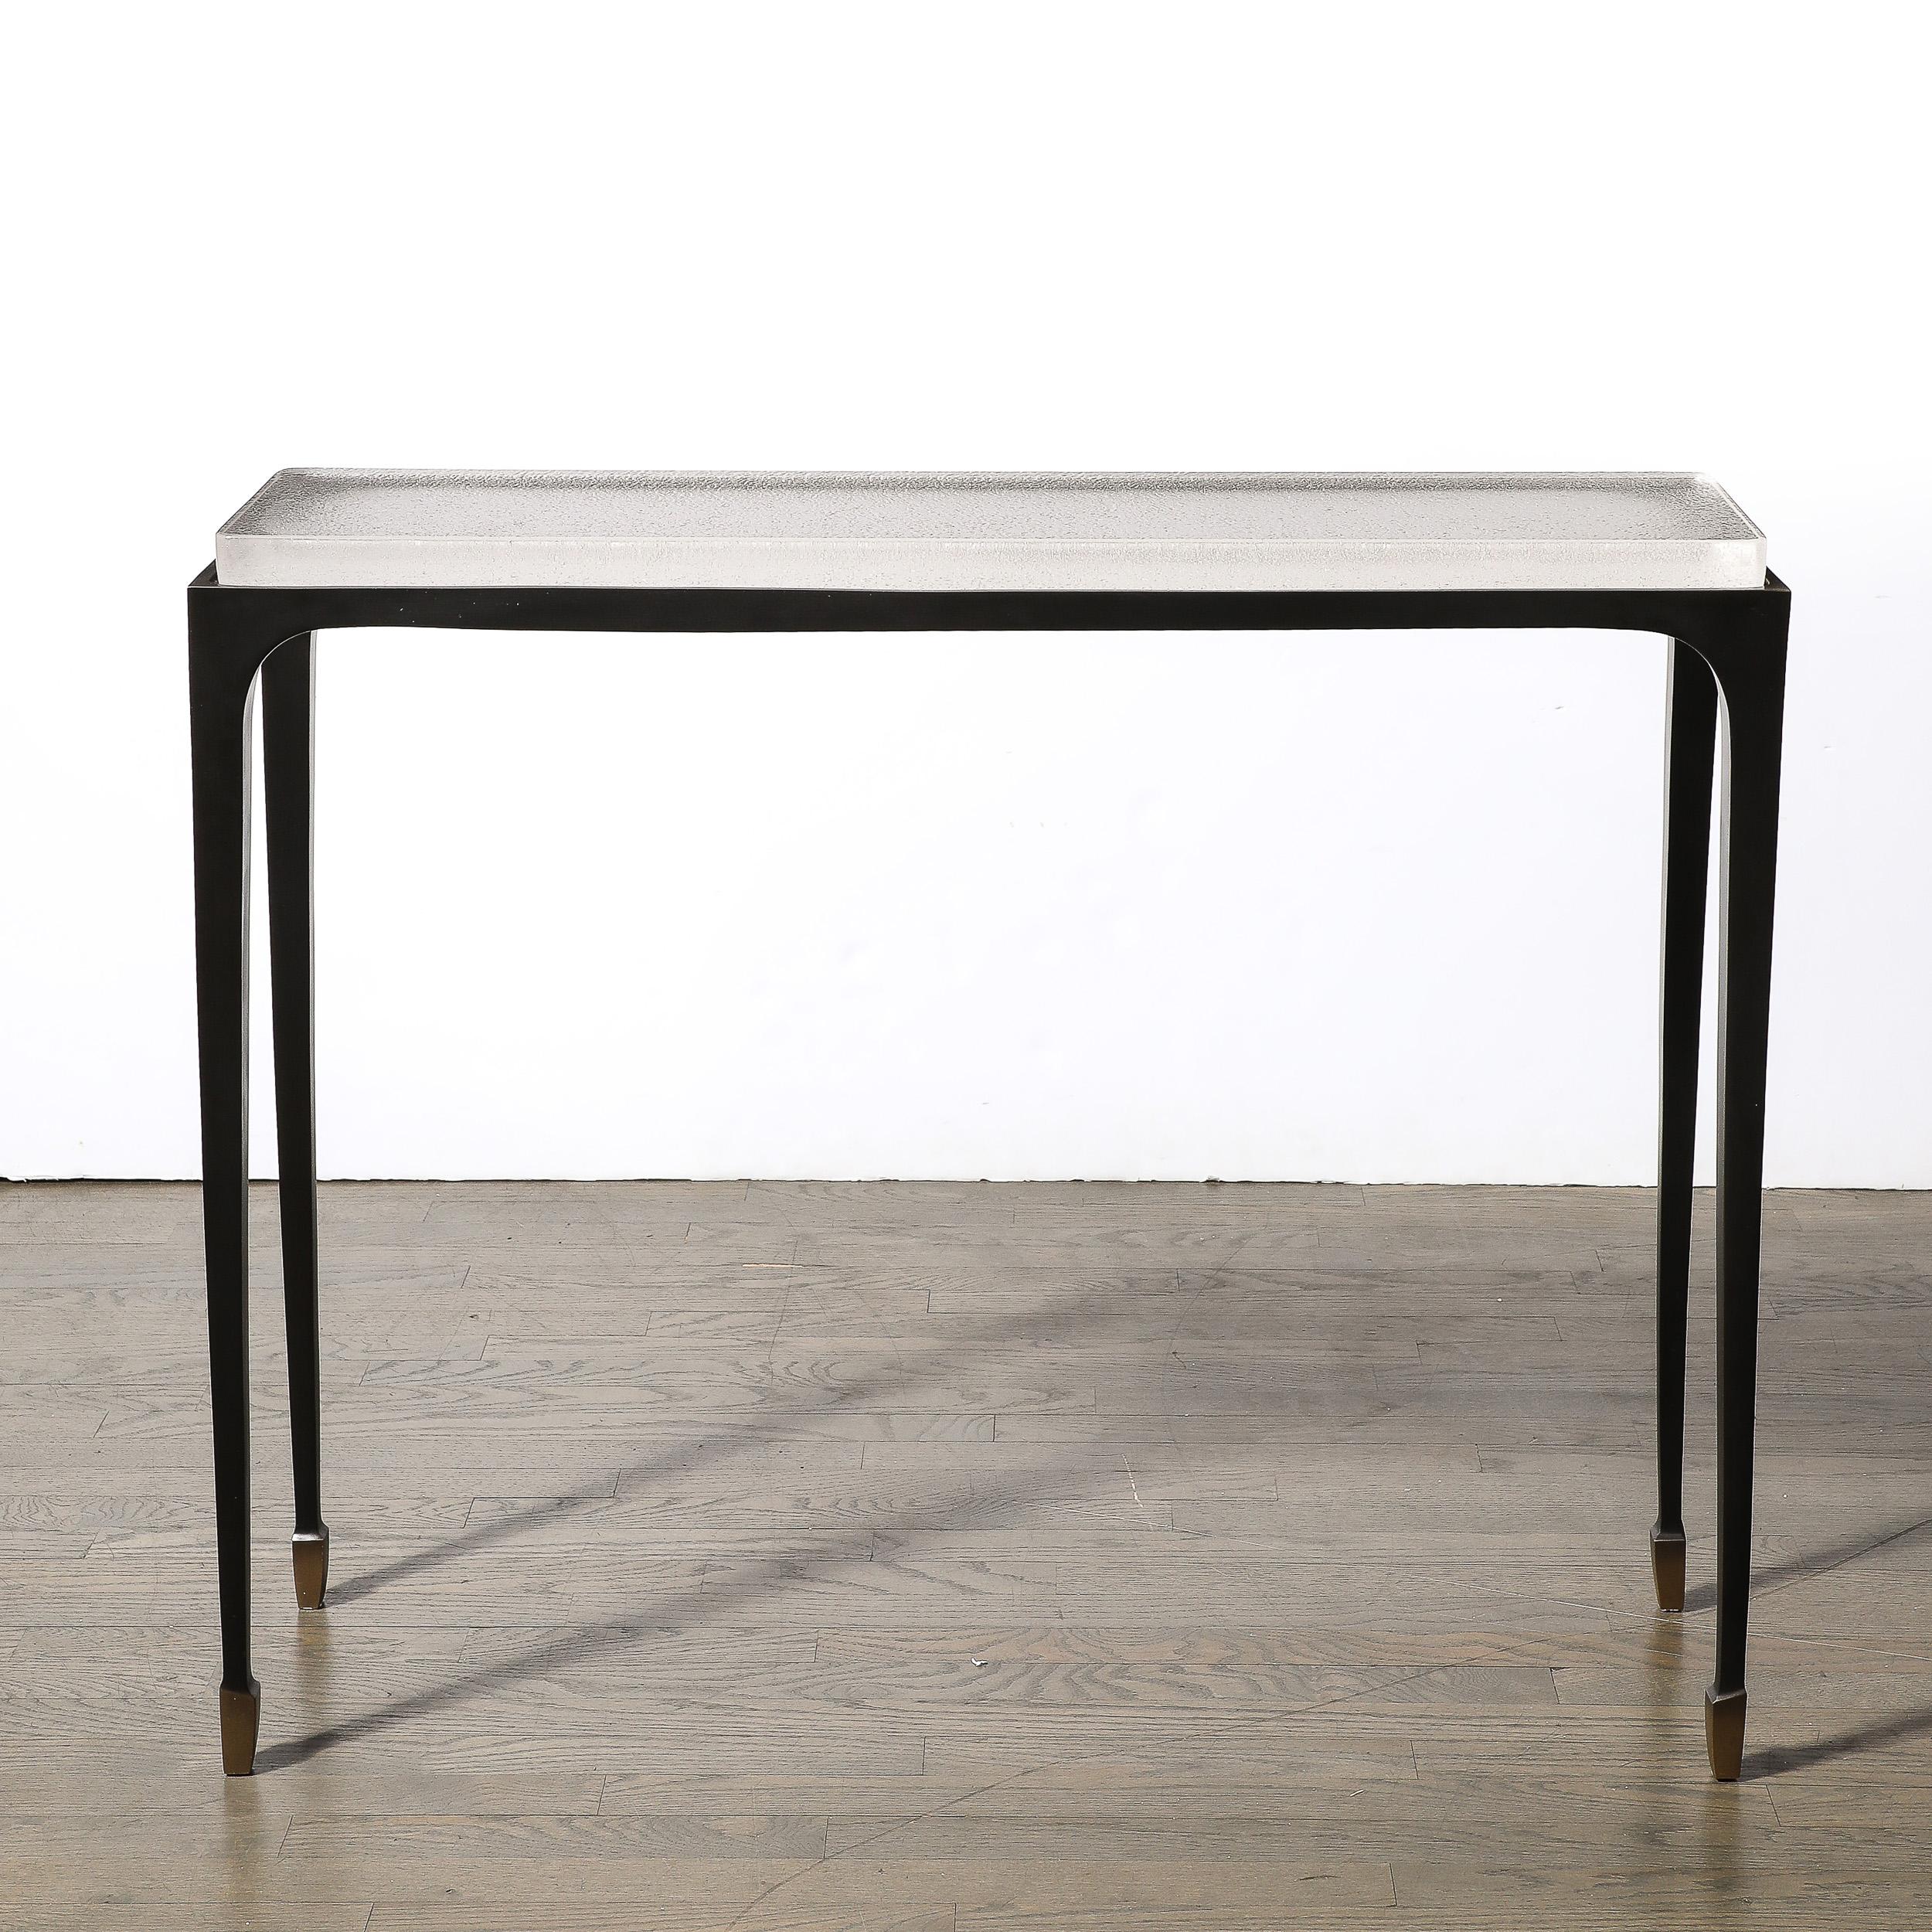 Modernist Sculptural Bronze & Inset Caste Ice Glass Console Table by Holly Hunt 1